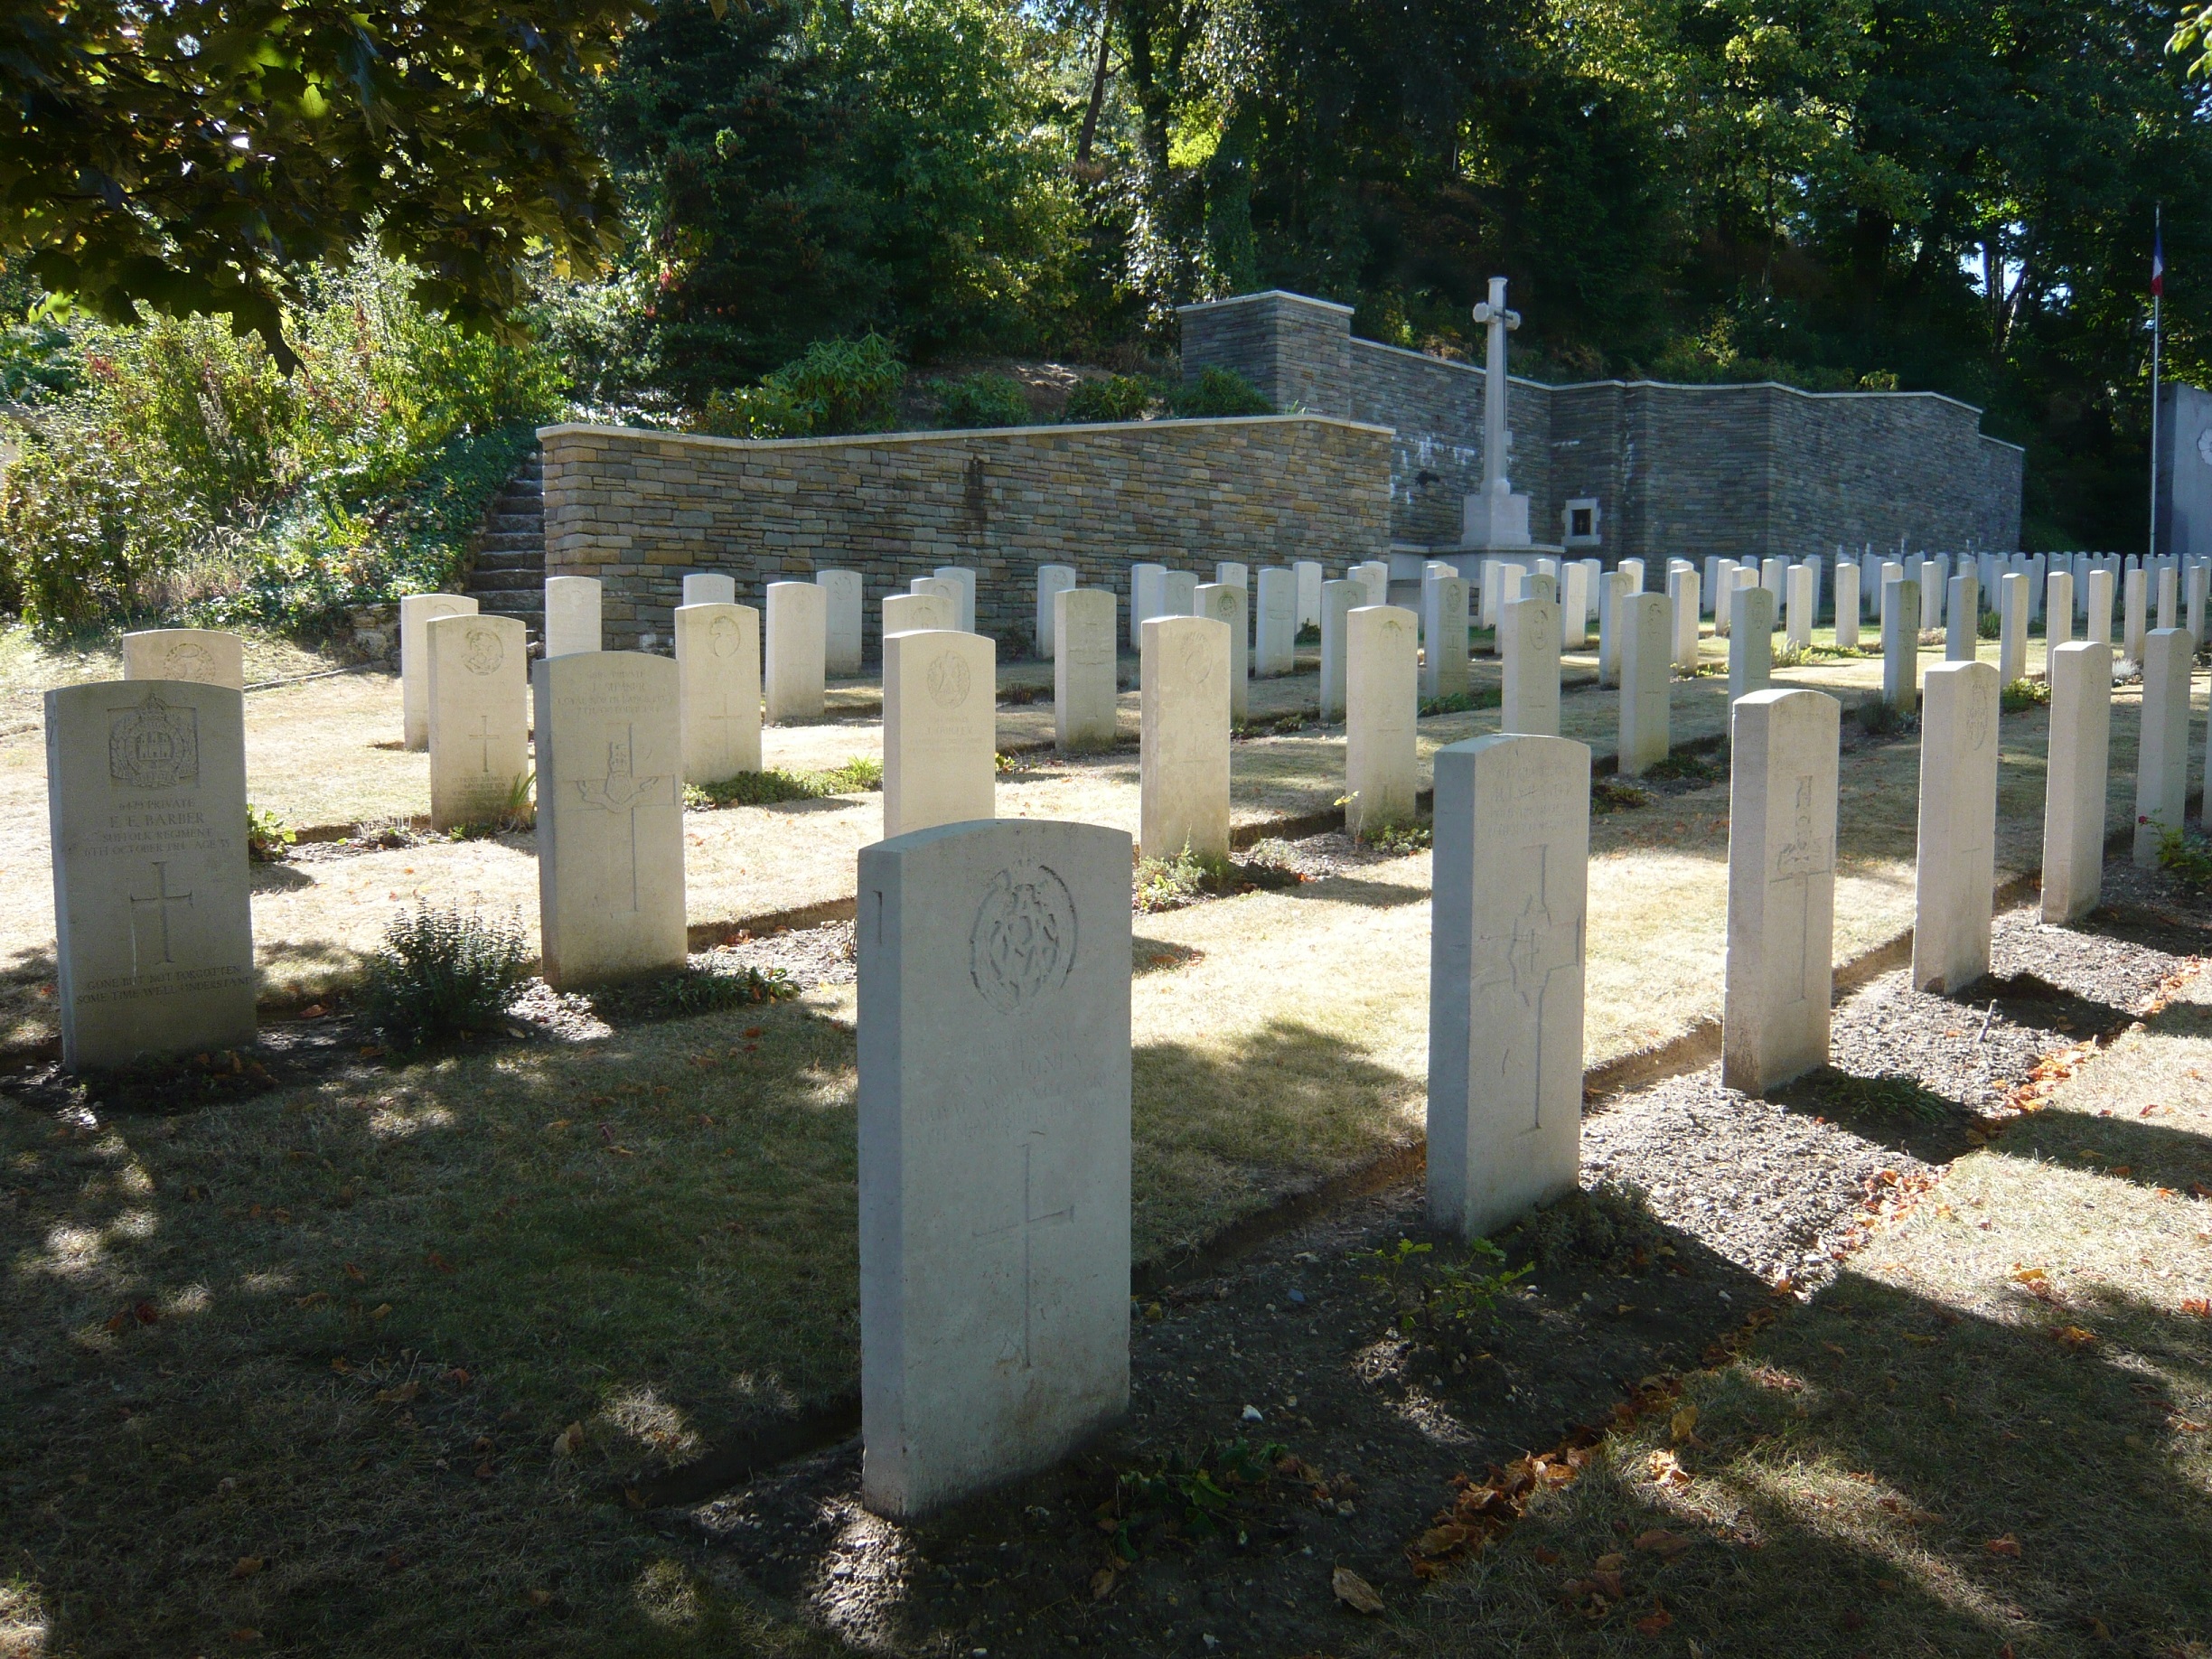 Les Gonards Cemetery, Versailles, France.  23.08.2009. - CWGC Plot -rsize<br>Ernest's Headstone is situated on the far left of the second row from the camera.<br />Photograph courtesy of Martin B., Great War Forum.